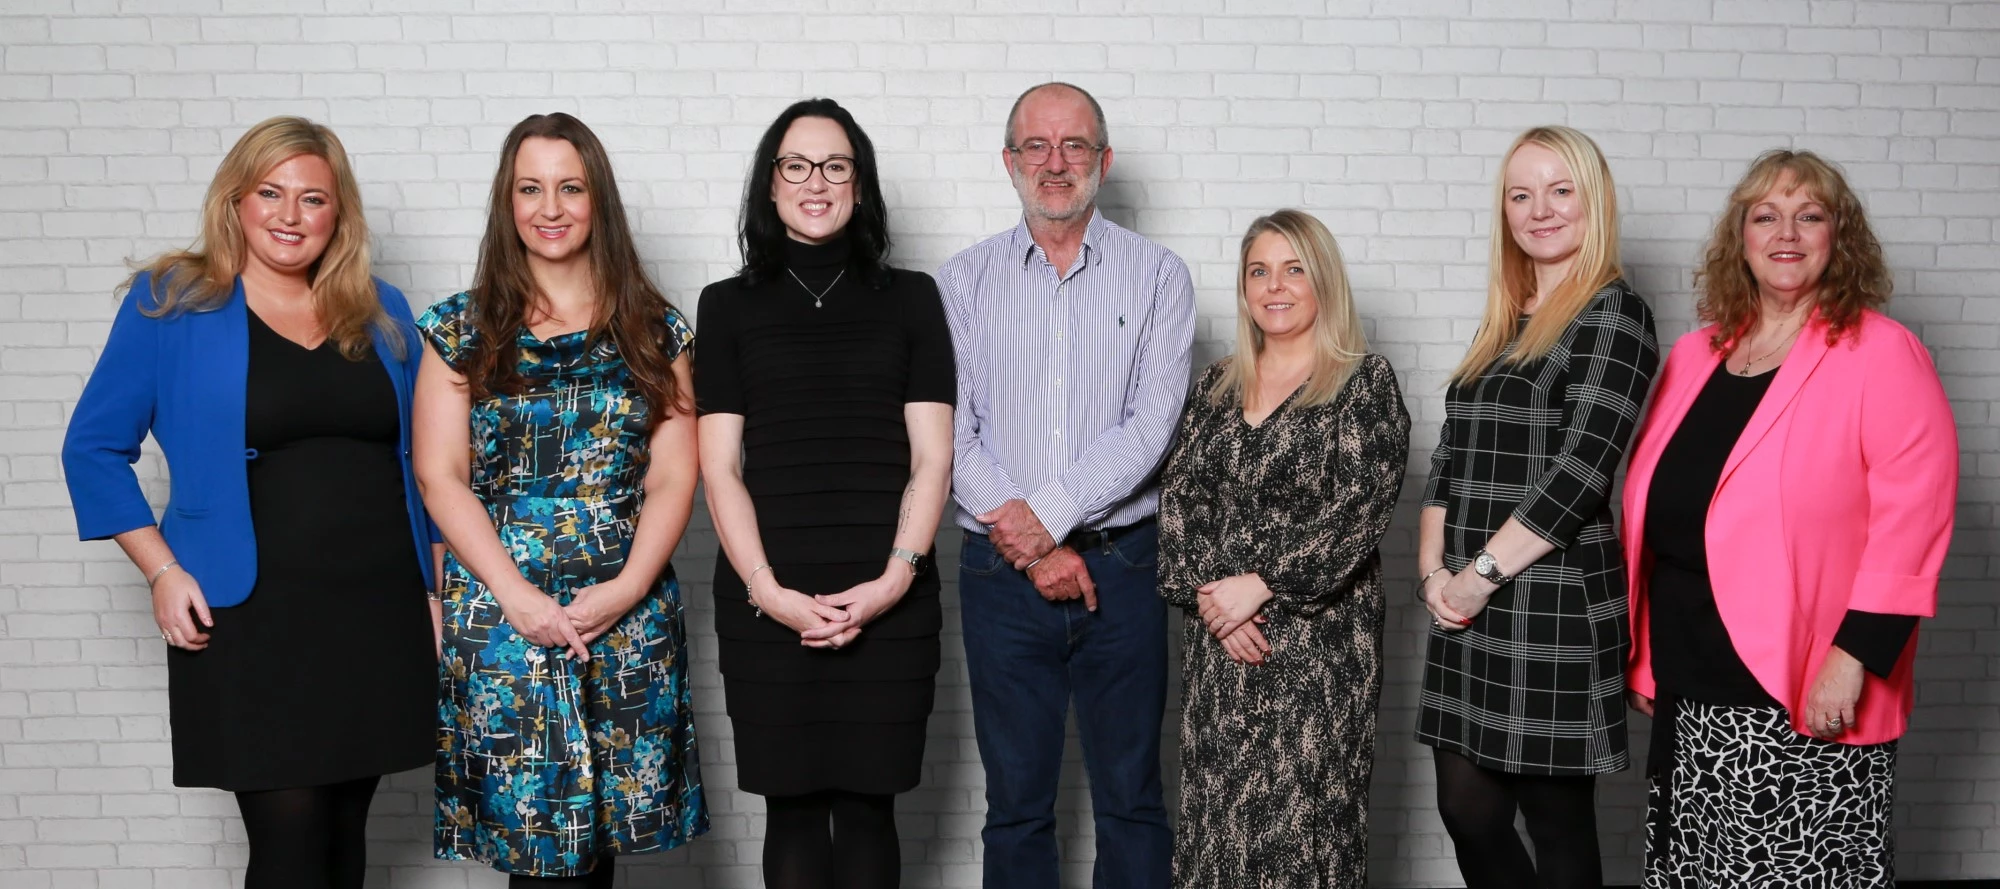 WELL Training CEO Lindsey Flynn, second left, Creative Director Lianne Russell, third left, and Chairperson Paul Kennedy welcome to the team, from far left, Samantha Mason, Terry Elliott, Rachel Thomas and Debbie Filgate